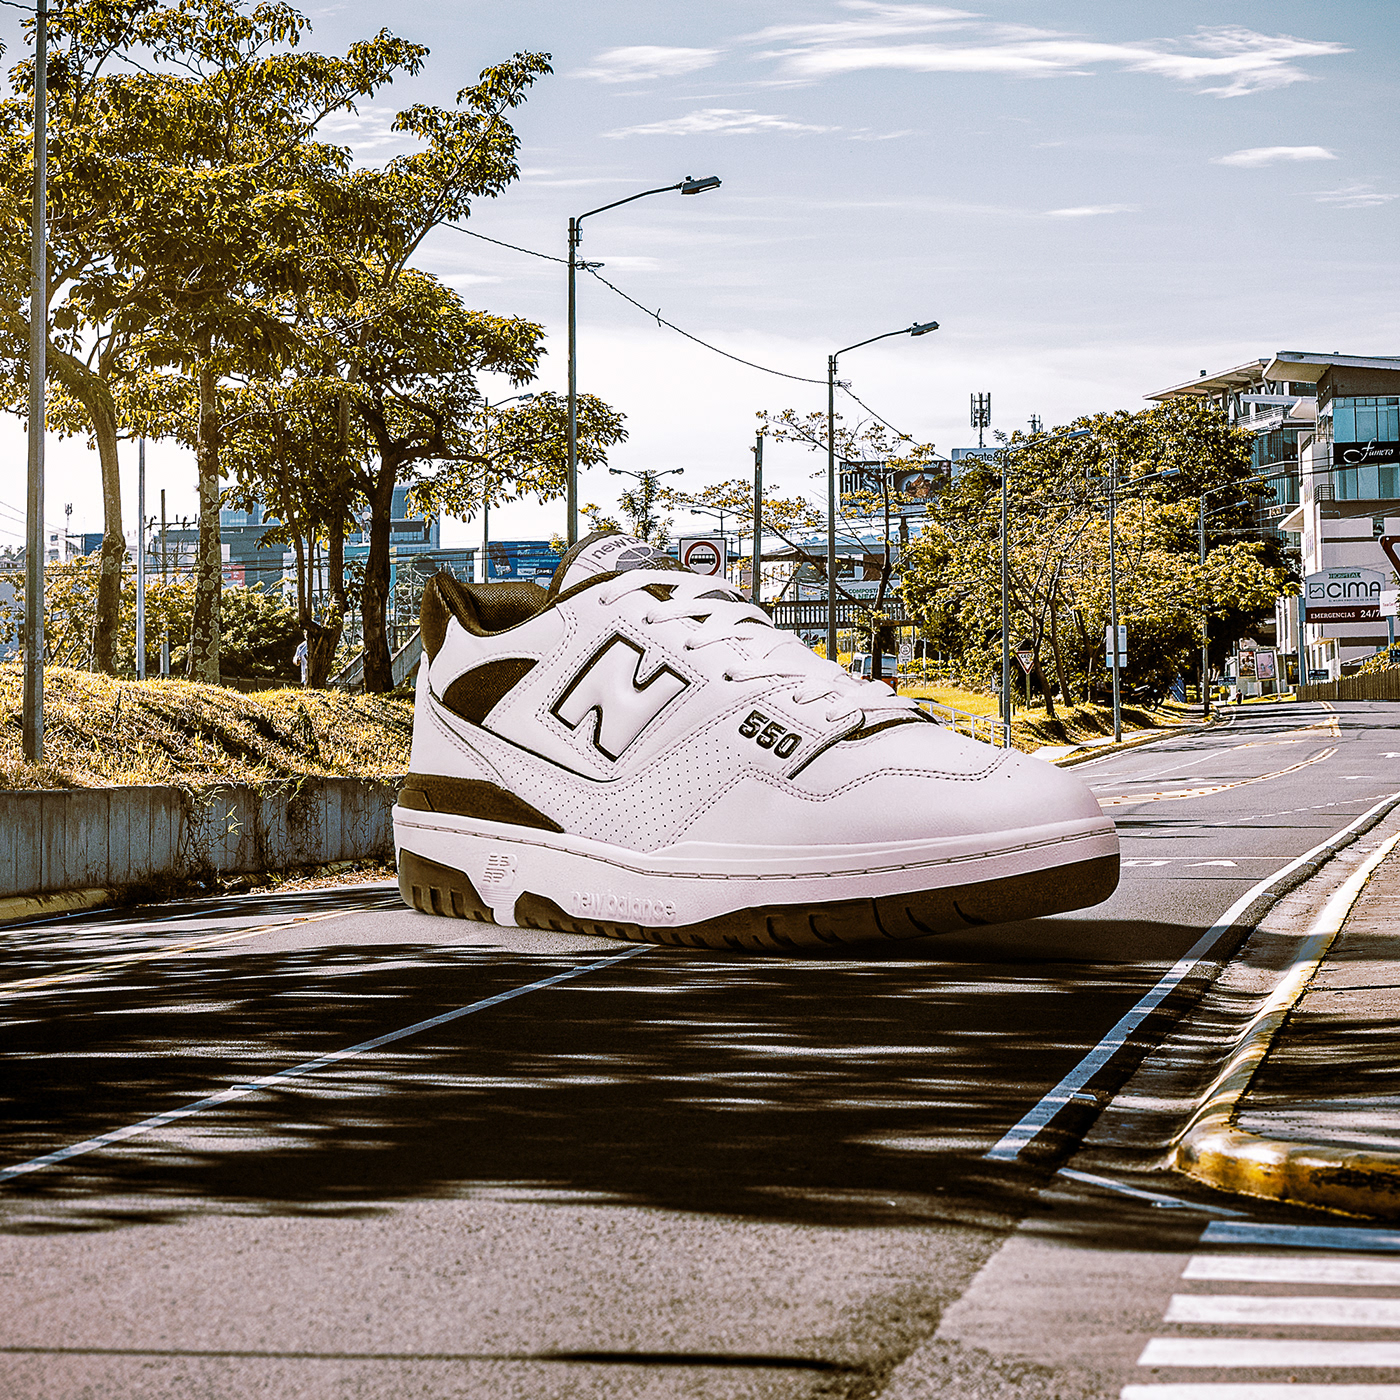 Photo composite of giant sneaker in nature. Retouching using Photoshop